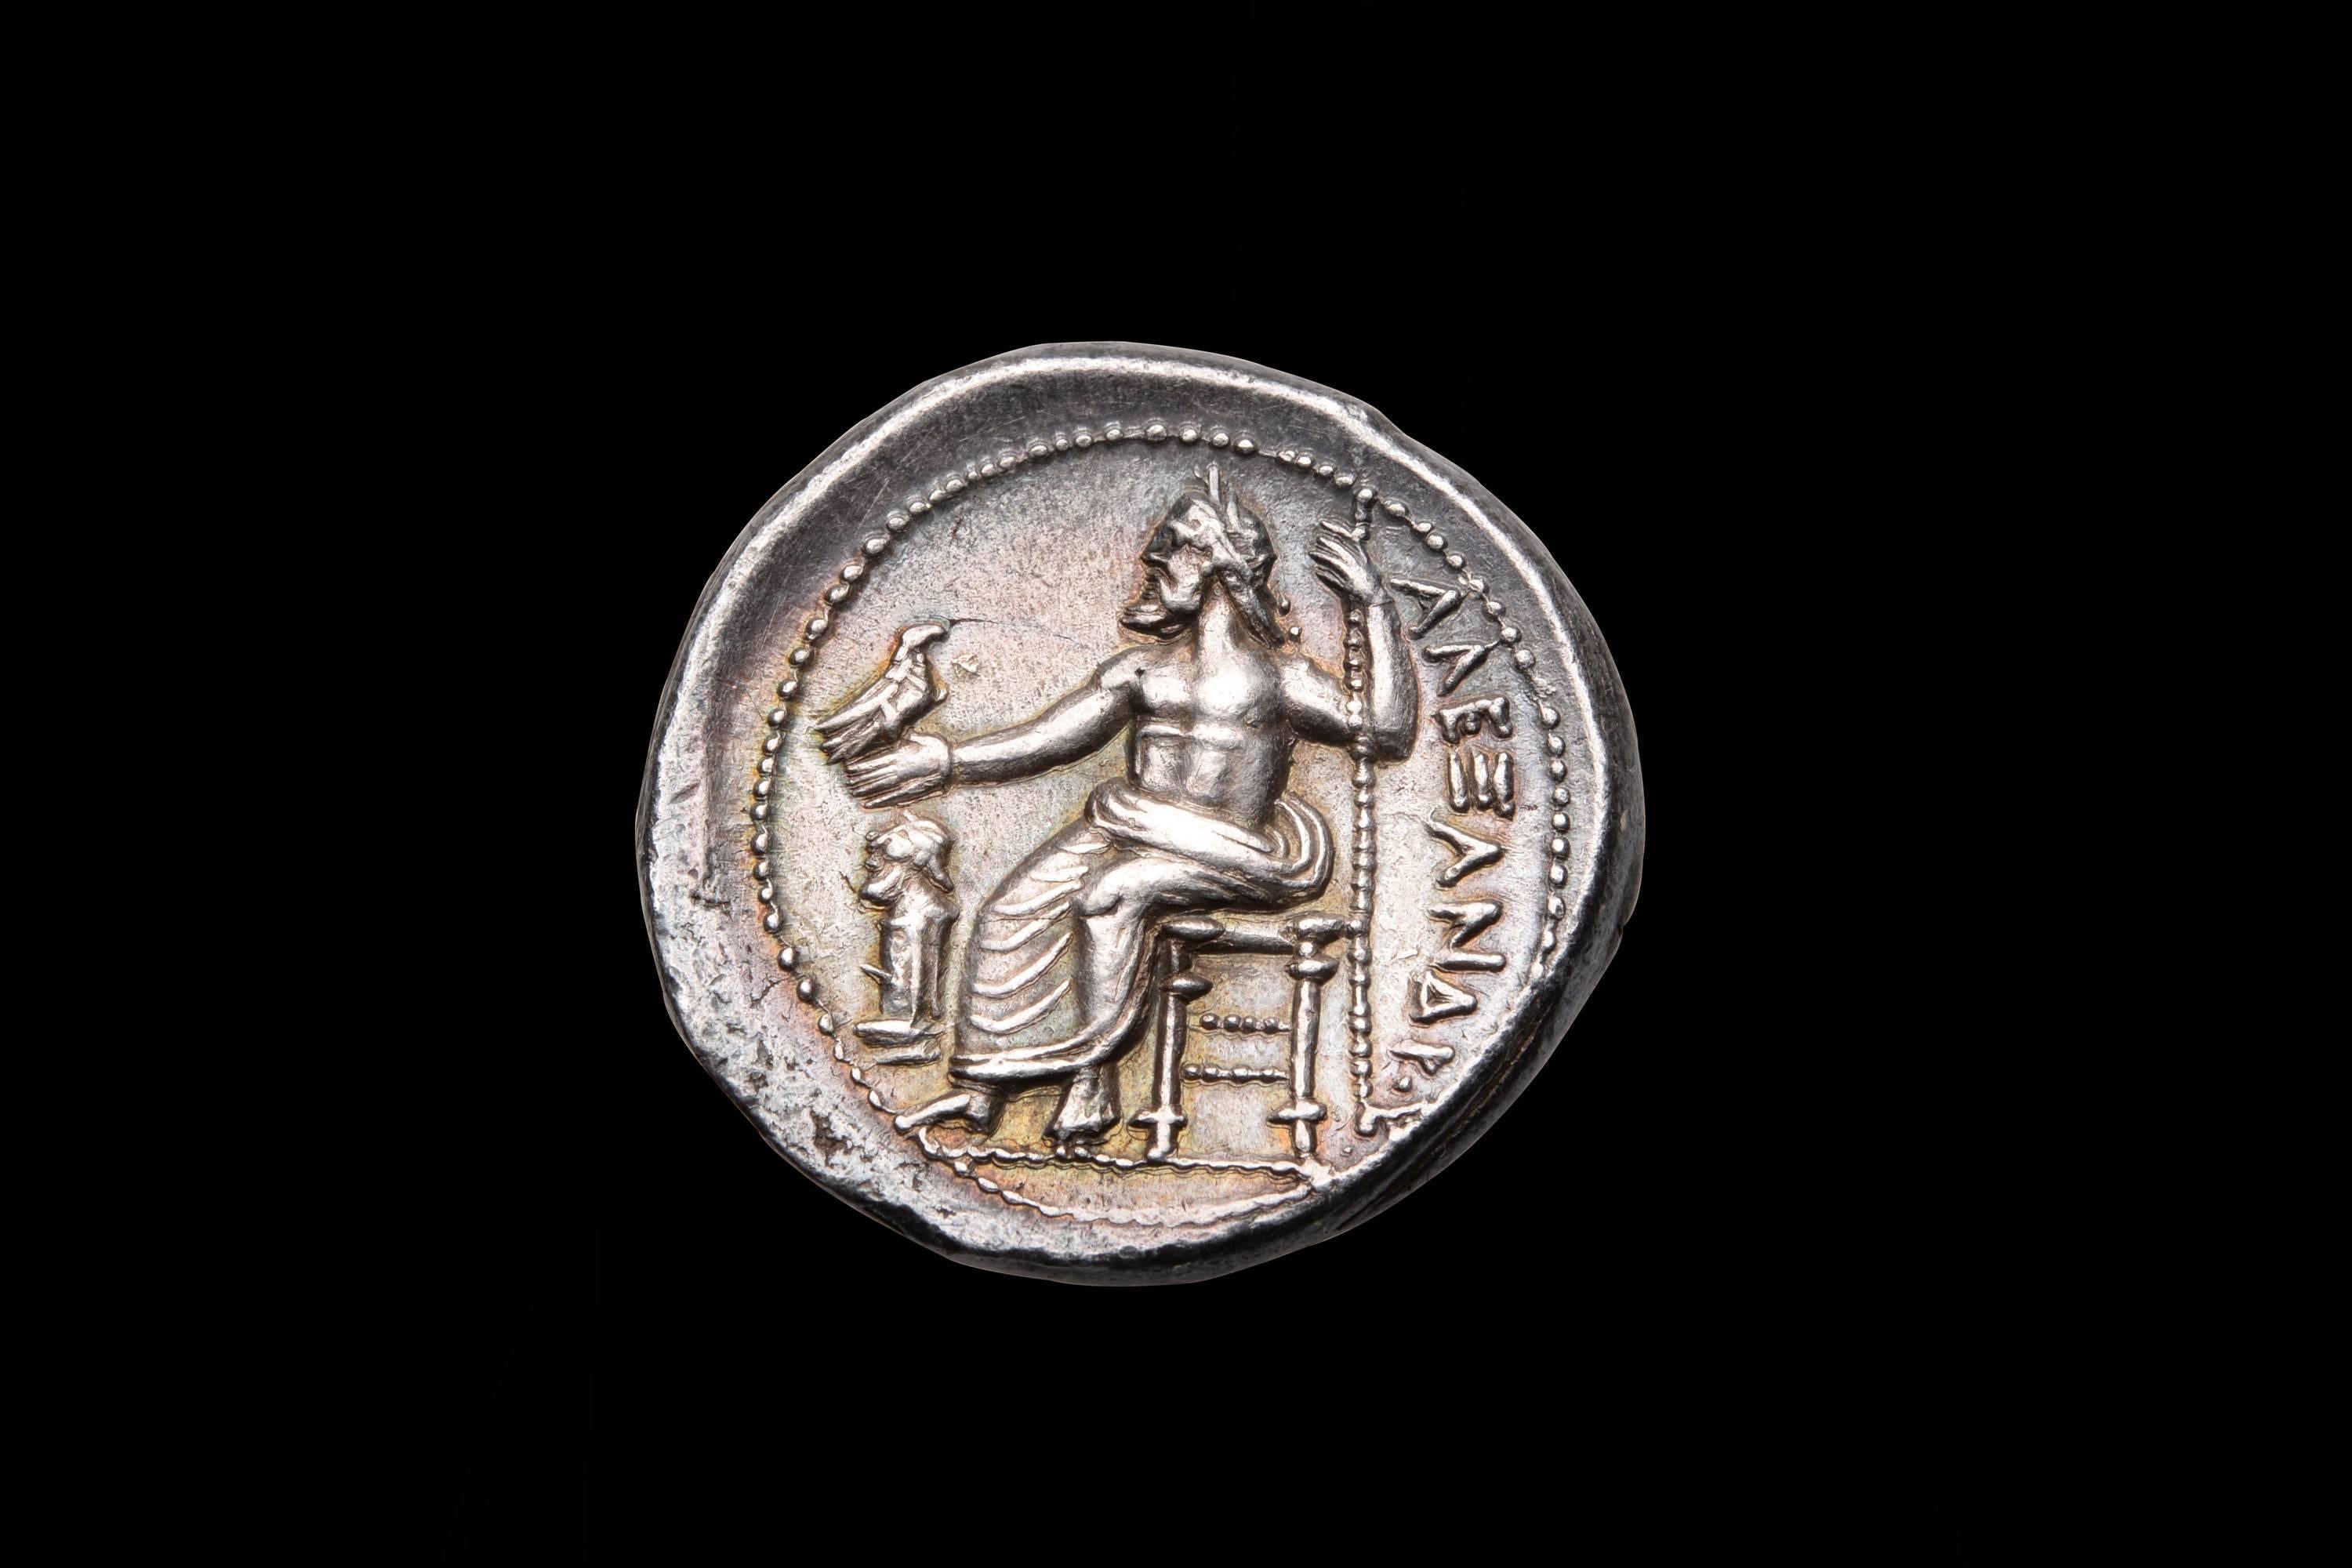 A beautiful and highly desirable lifetime issue Alexander the Great tetradrachm. Struck at the Amphipolis mint, during Alexander's lifetime, circa 325 - 323 BC.

The obverse with a refined, naturalistic portrait of the demigod Herakles. He is